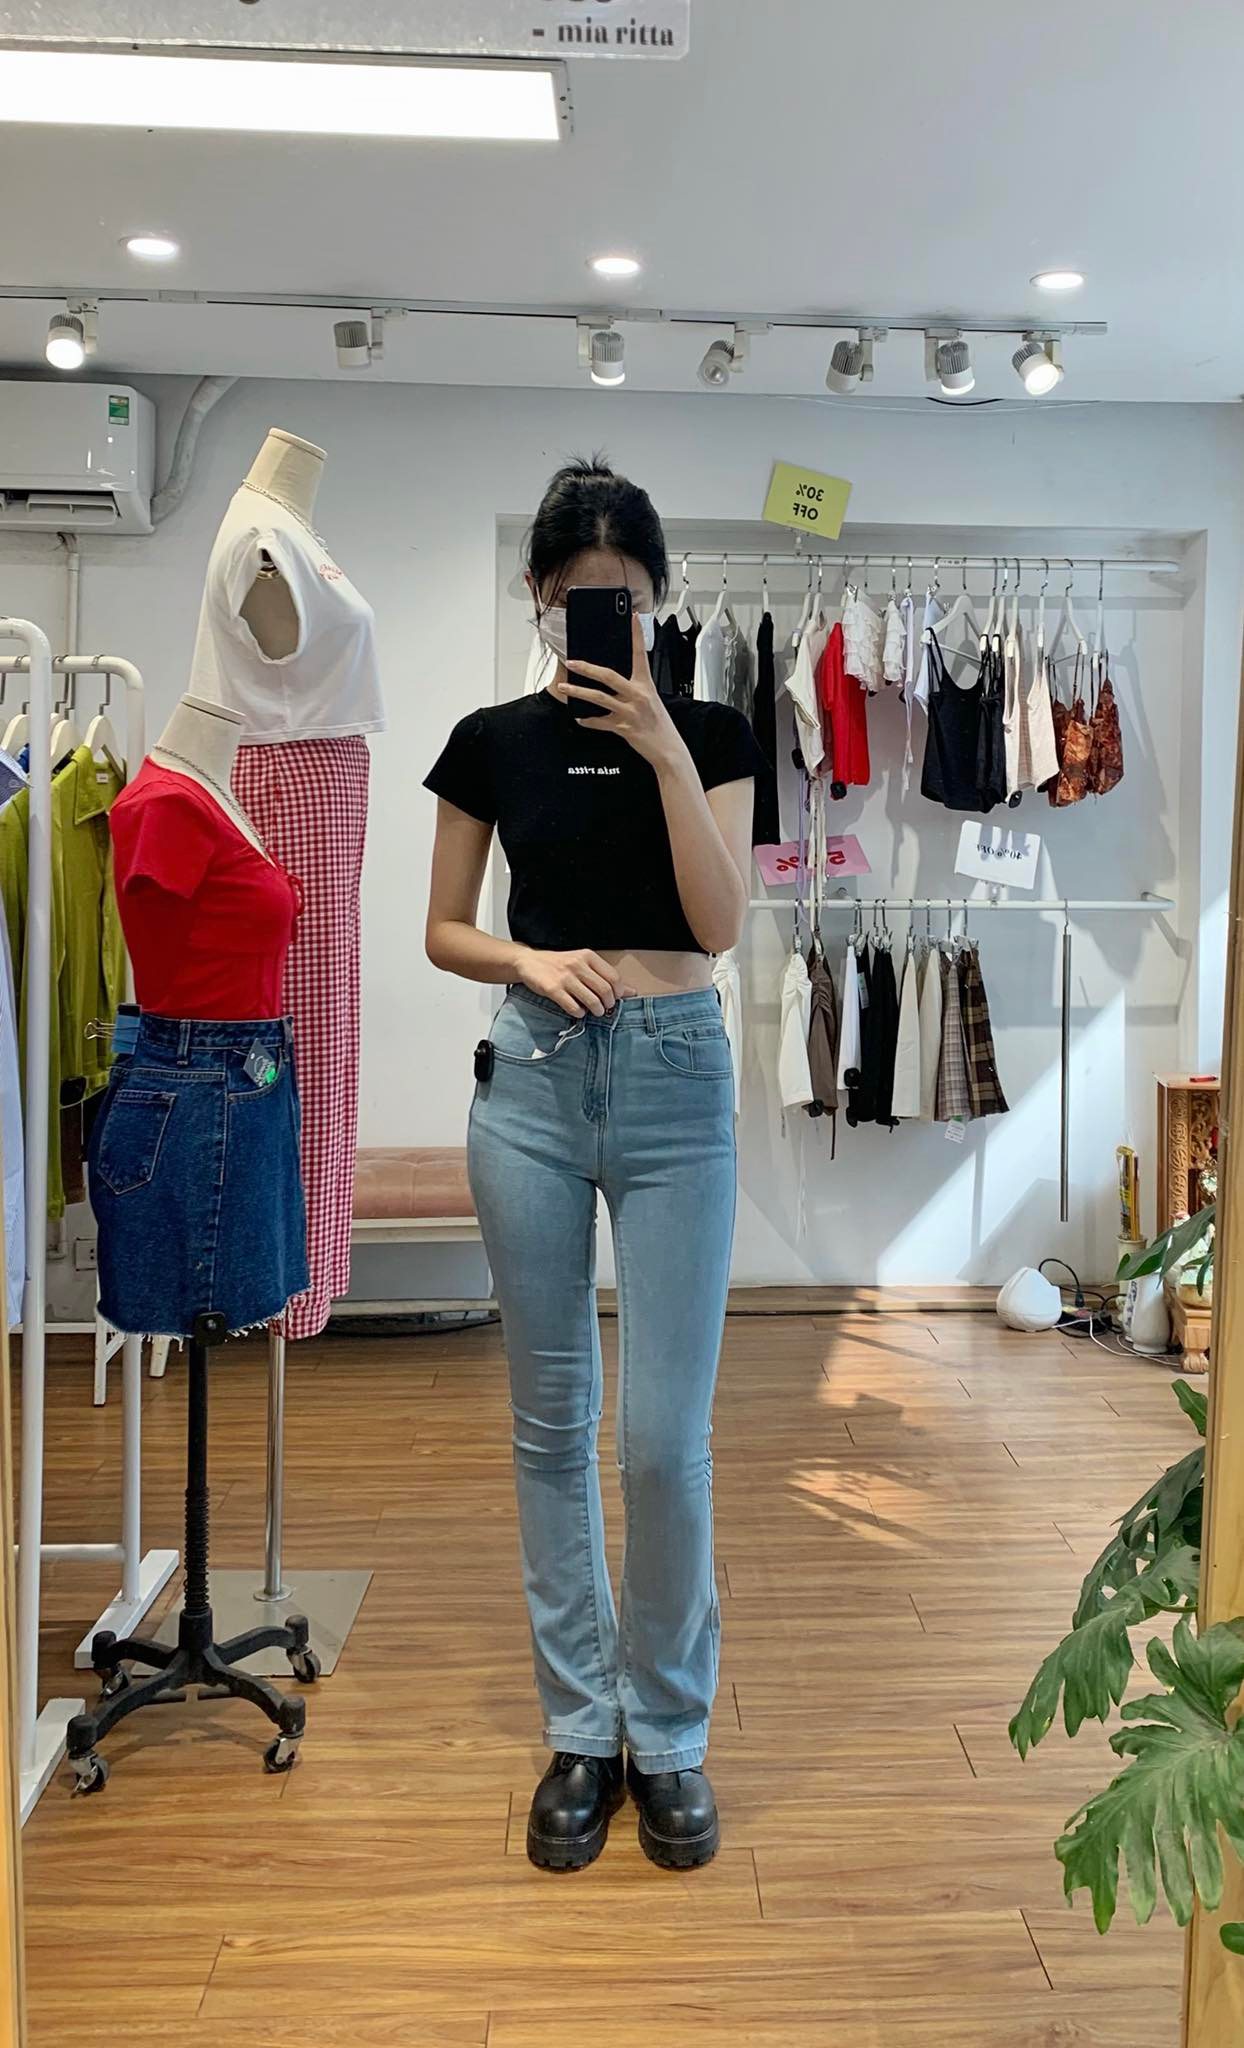 Visiting shops selling jeans in Hanoi, I gathered 10 models worth buying: Just pulled my leg and cheated on my super top 3 - Photo 19.